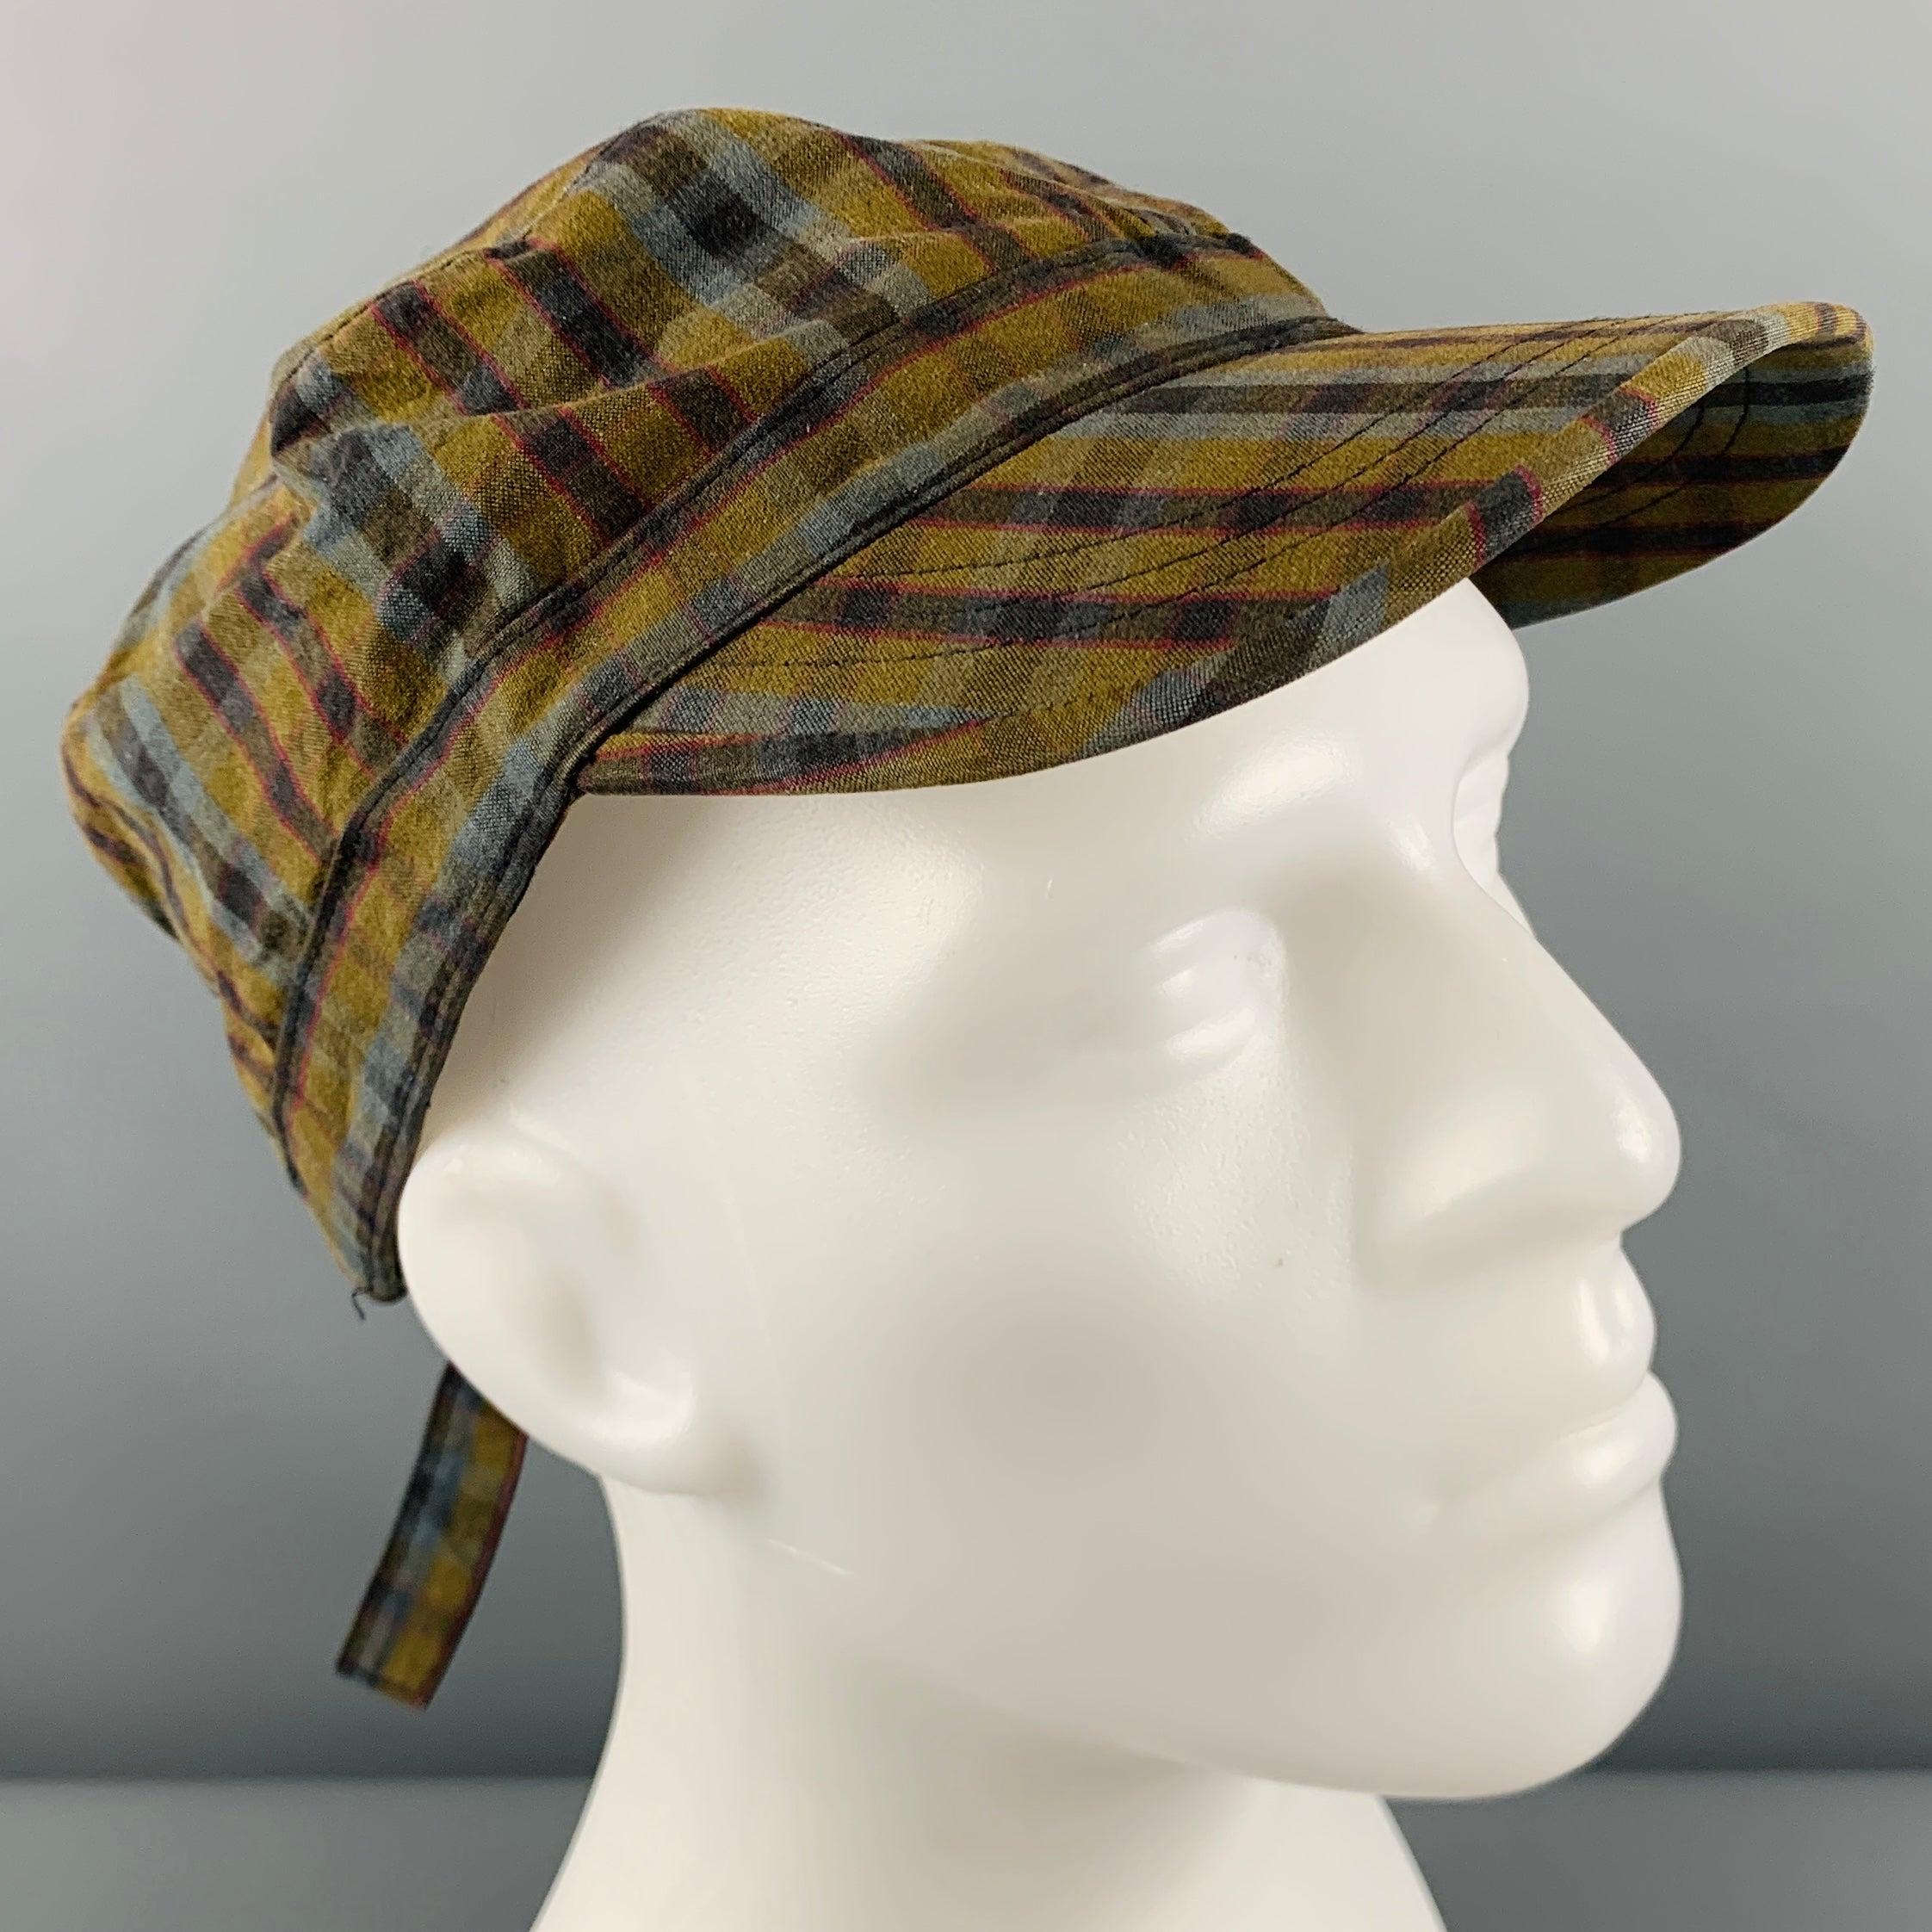 MARC JACOBS hat in a grey and olive green cotton featuring a low cap style, plaid pattern, and adjustable closure..Excellent Pre-Owned Condition. 

Marked:   size not marked 

Measurements: 
  Opening: 21 inches Brim: 2.25 inches Height: 3.5 inches